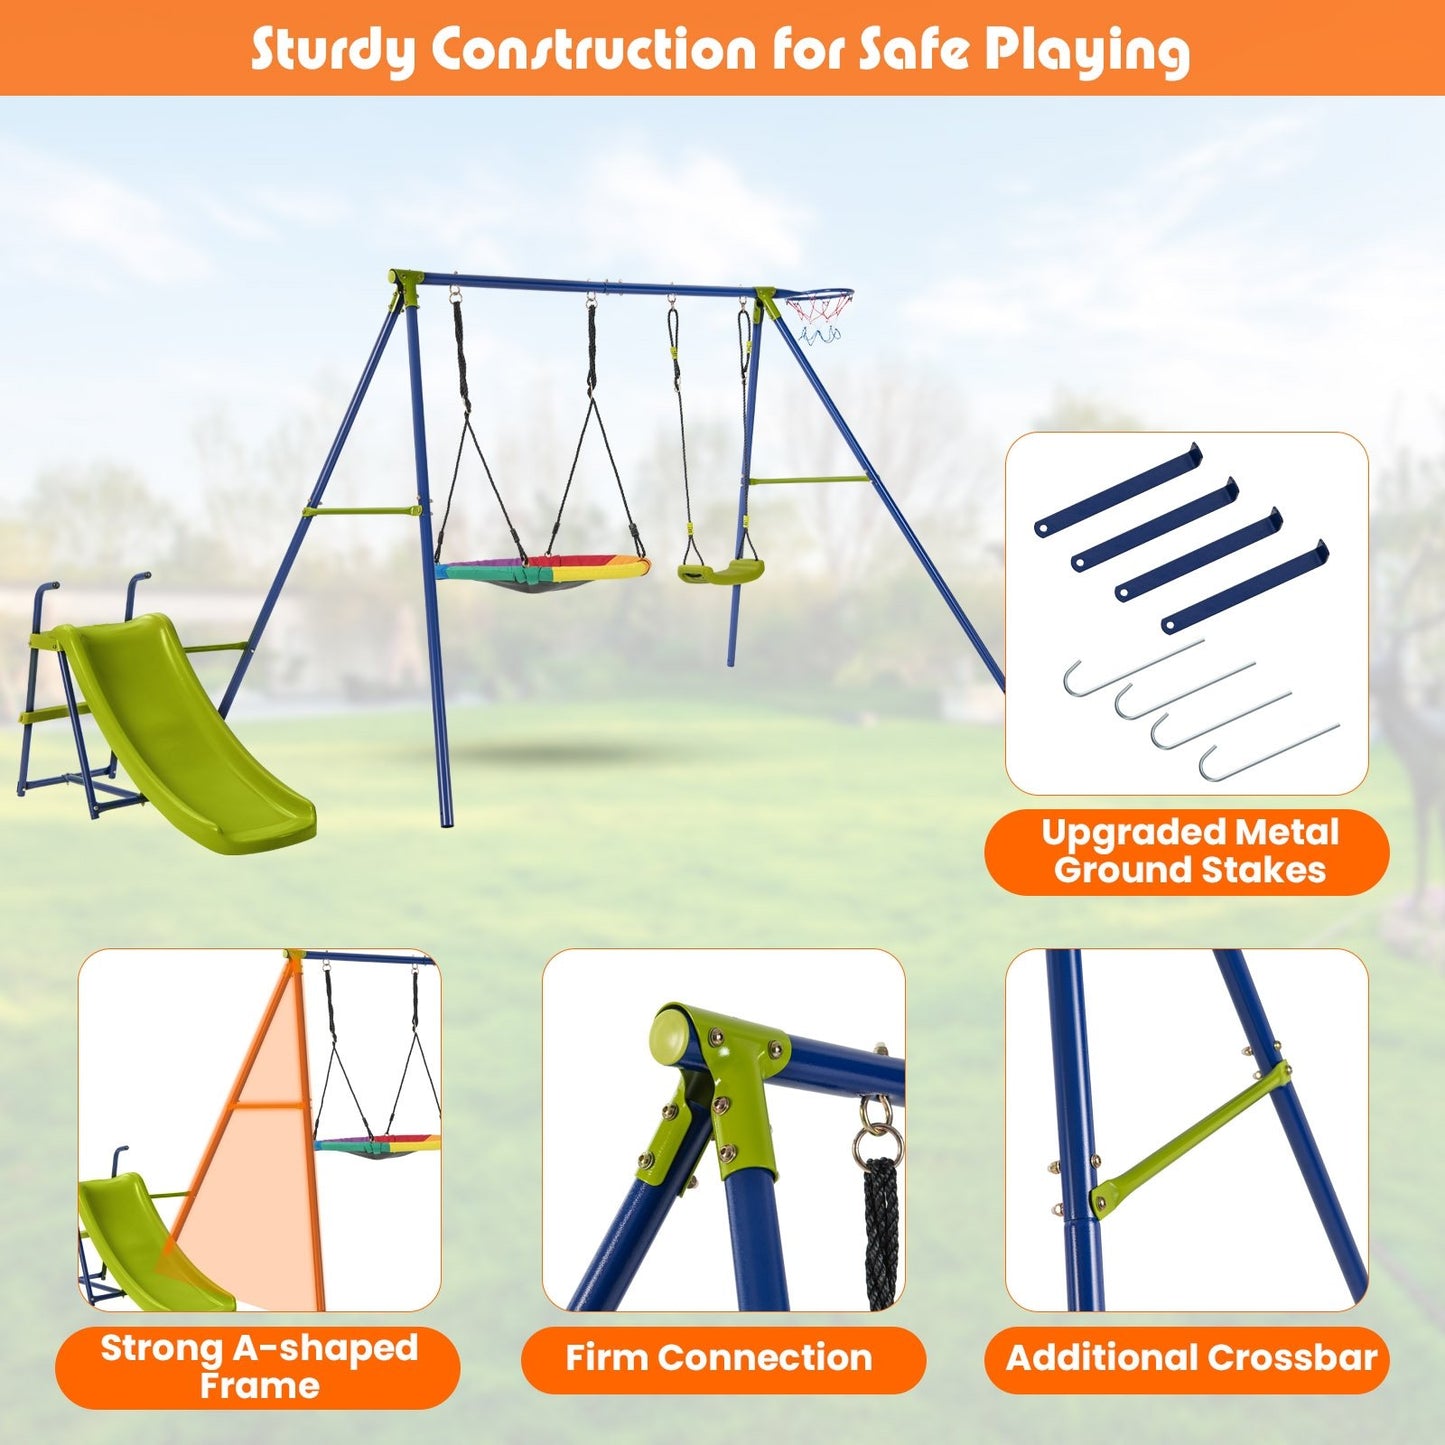 4-in-1 Heavy-Duty Metal Playset with Slide and Basketball Hoop, Multicolor